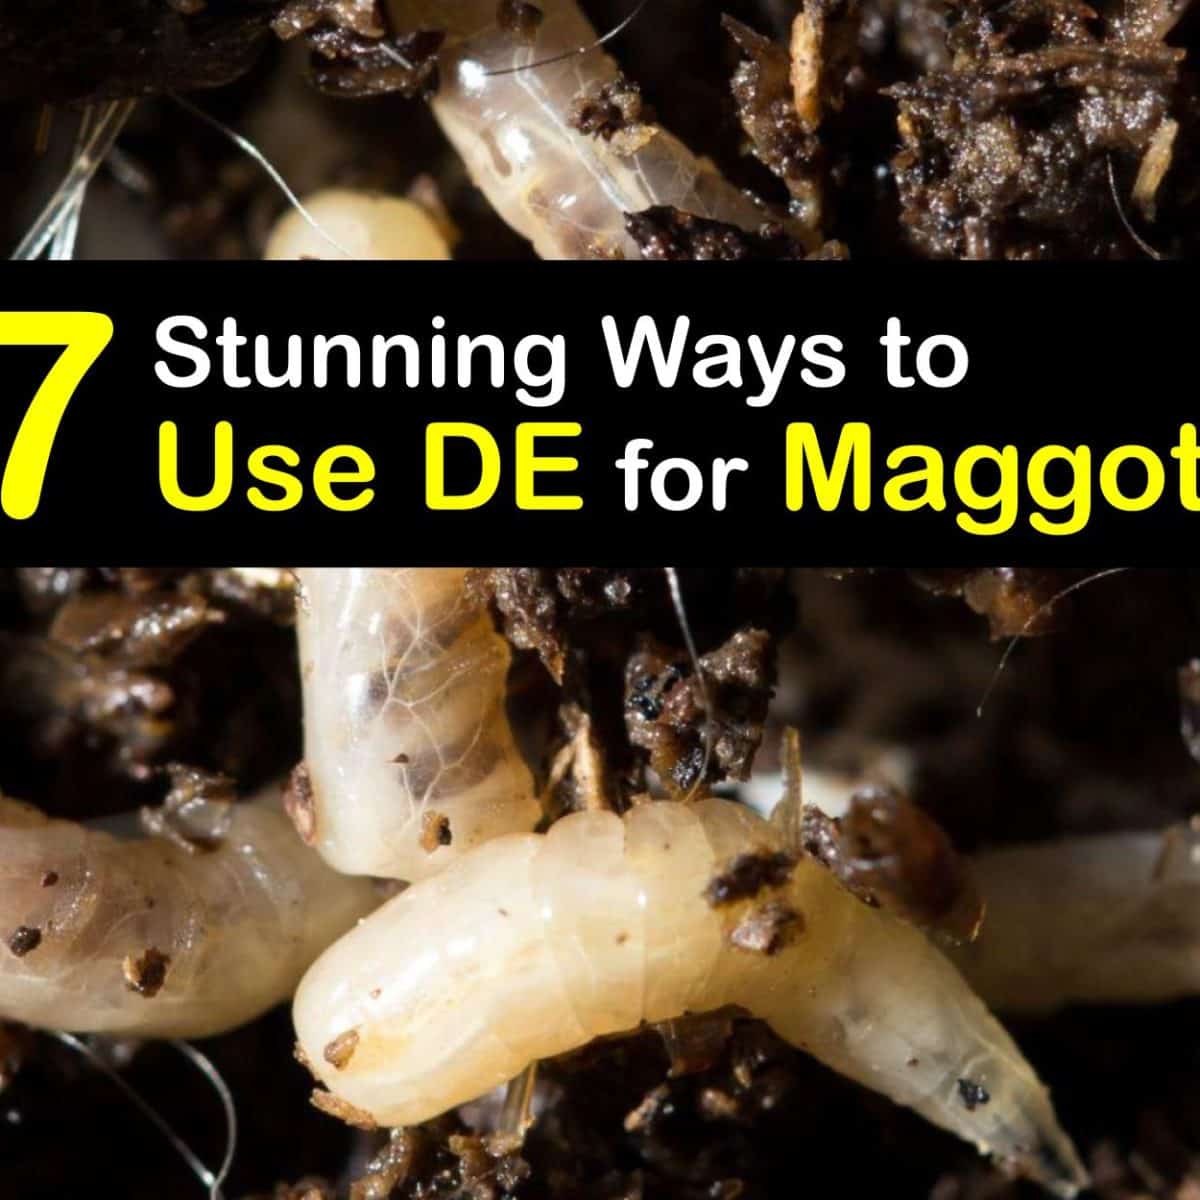 termite maggot like worms in house - Supersized Blogger Image Bank